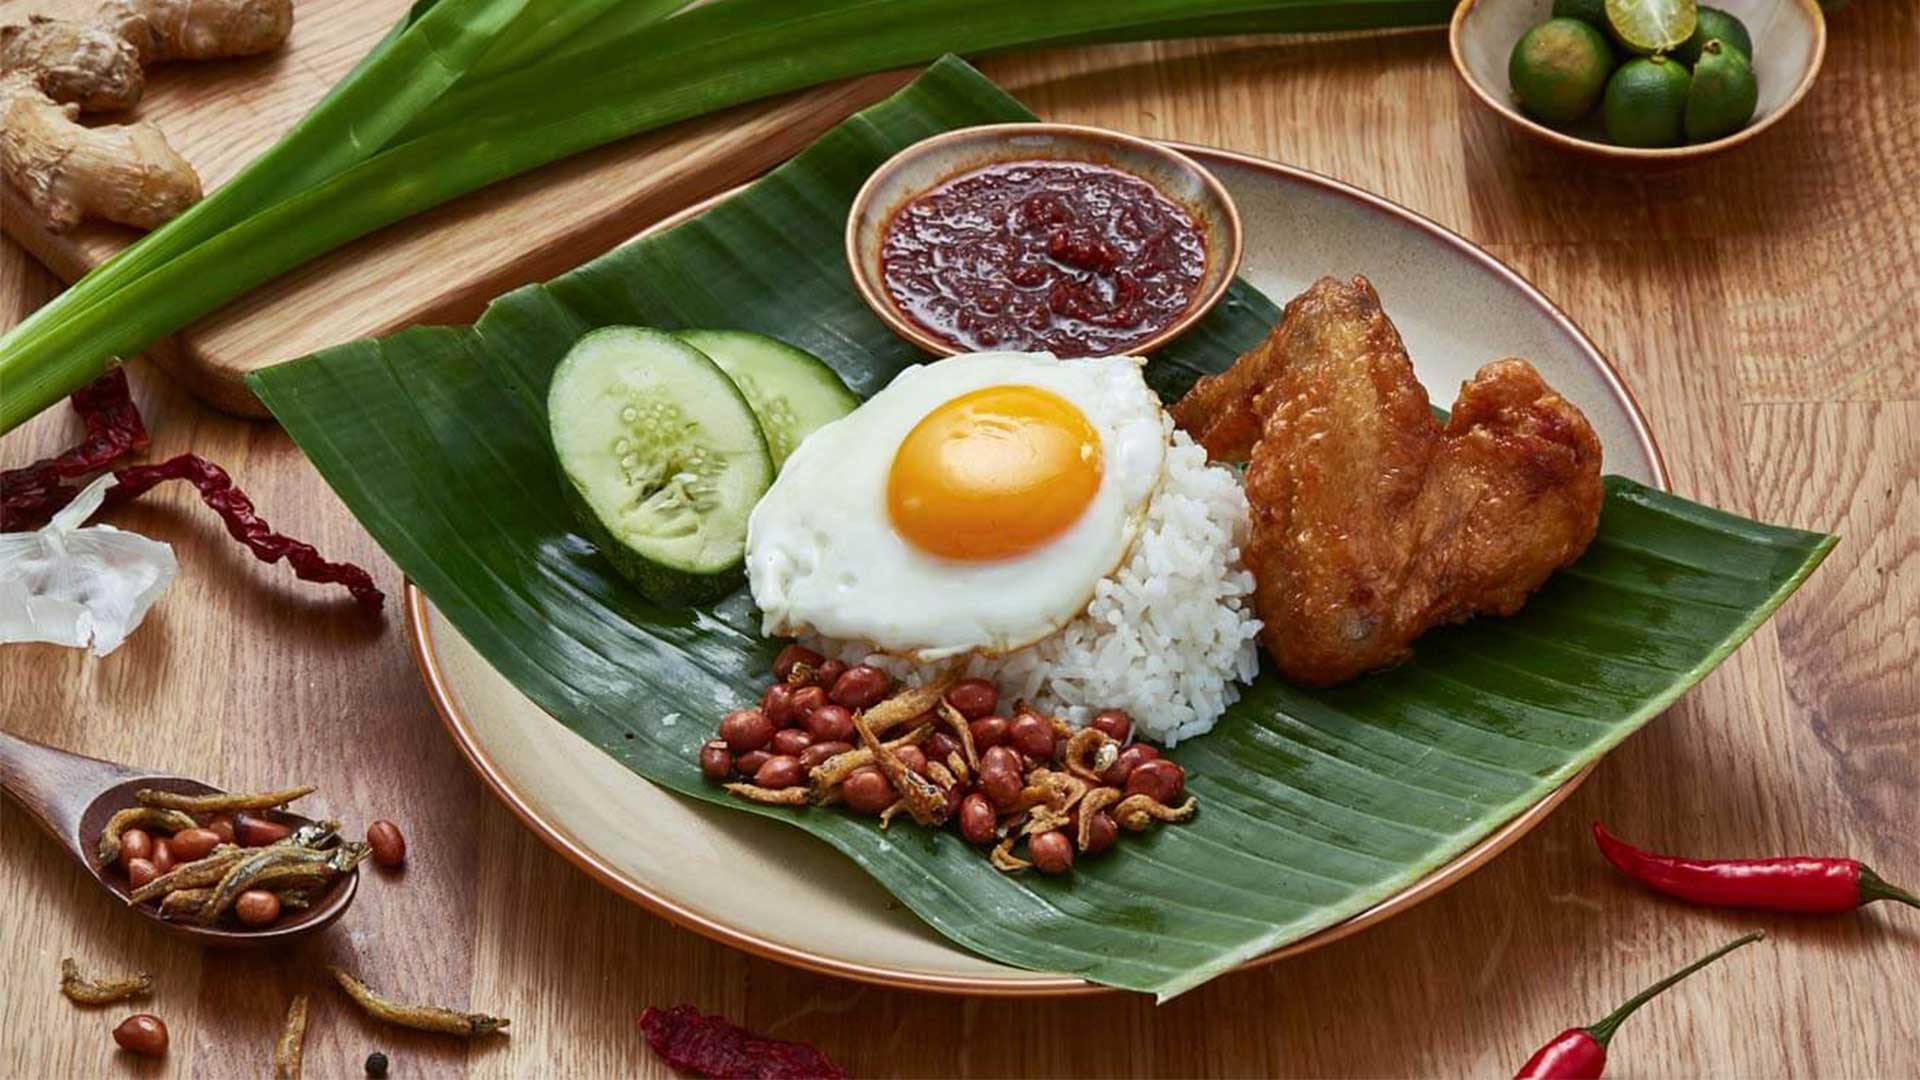 Nasi Lemak, found served at the food court, a casual dining spot in Singapore